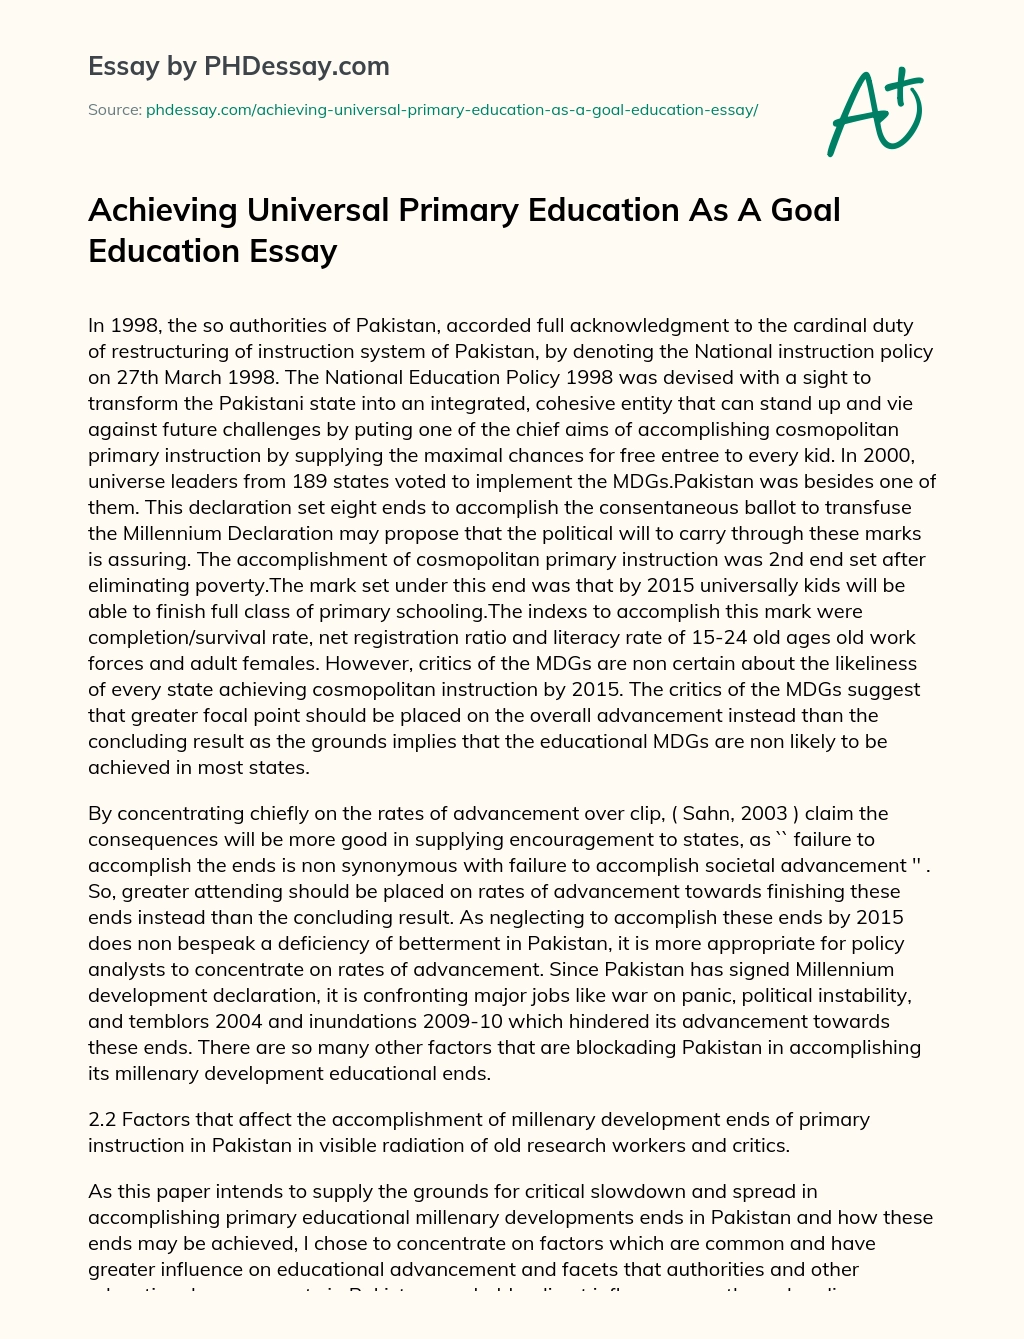 Achieving Universal Primary Education As A Goal Education Essay essay